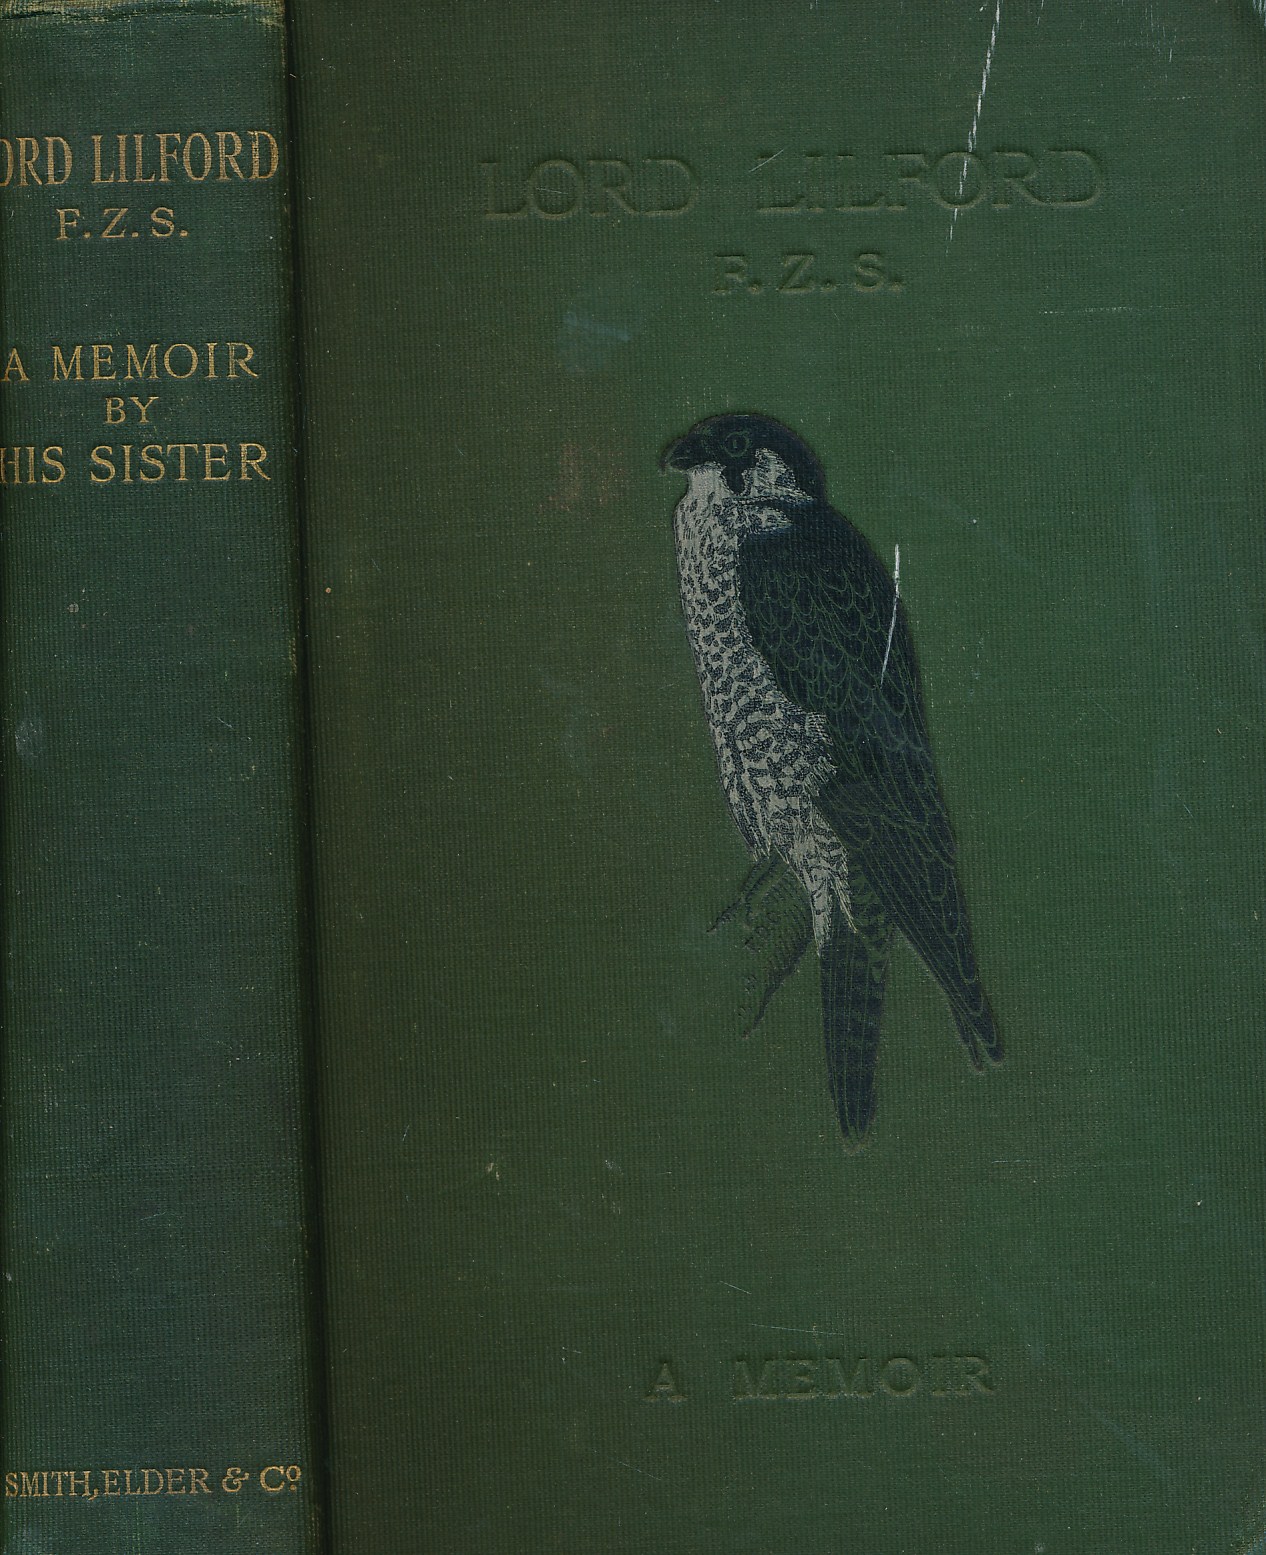 Lord Lilford, Thomas Littleton, Fourth Baron F.Z.S President of The British Ornithologists' Union. A Memoir by His Sister. With An Introduction by The Bishop of London. Author's inscription.